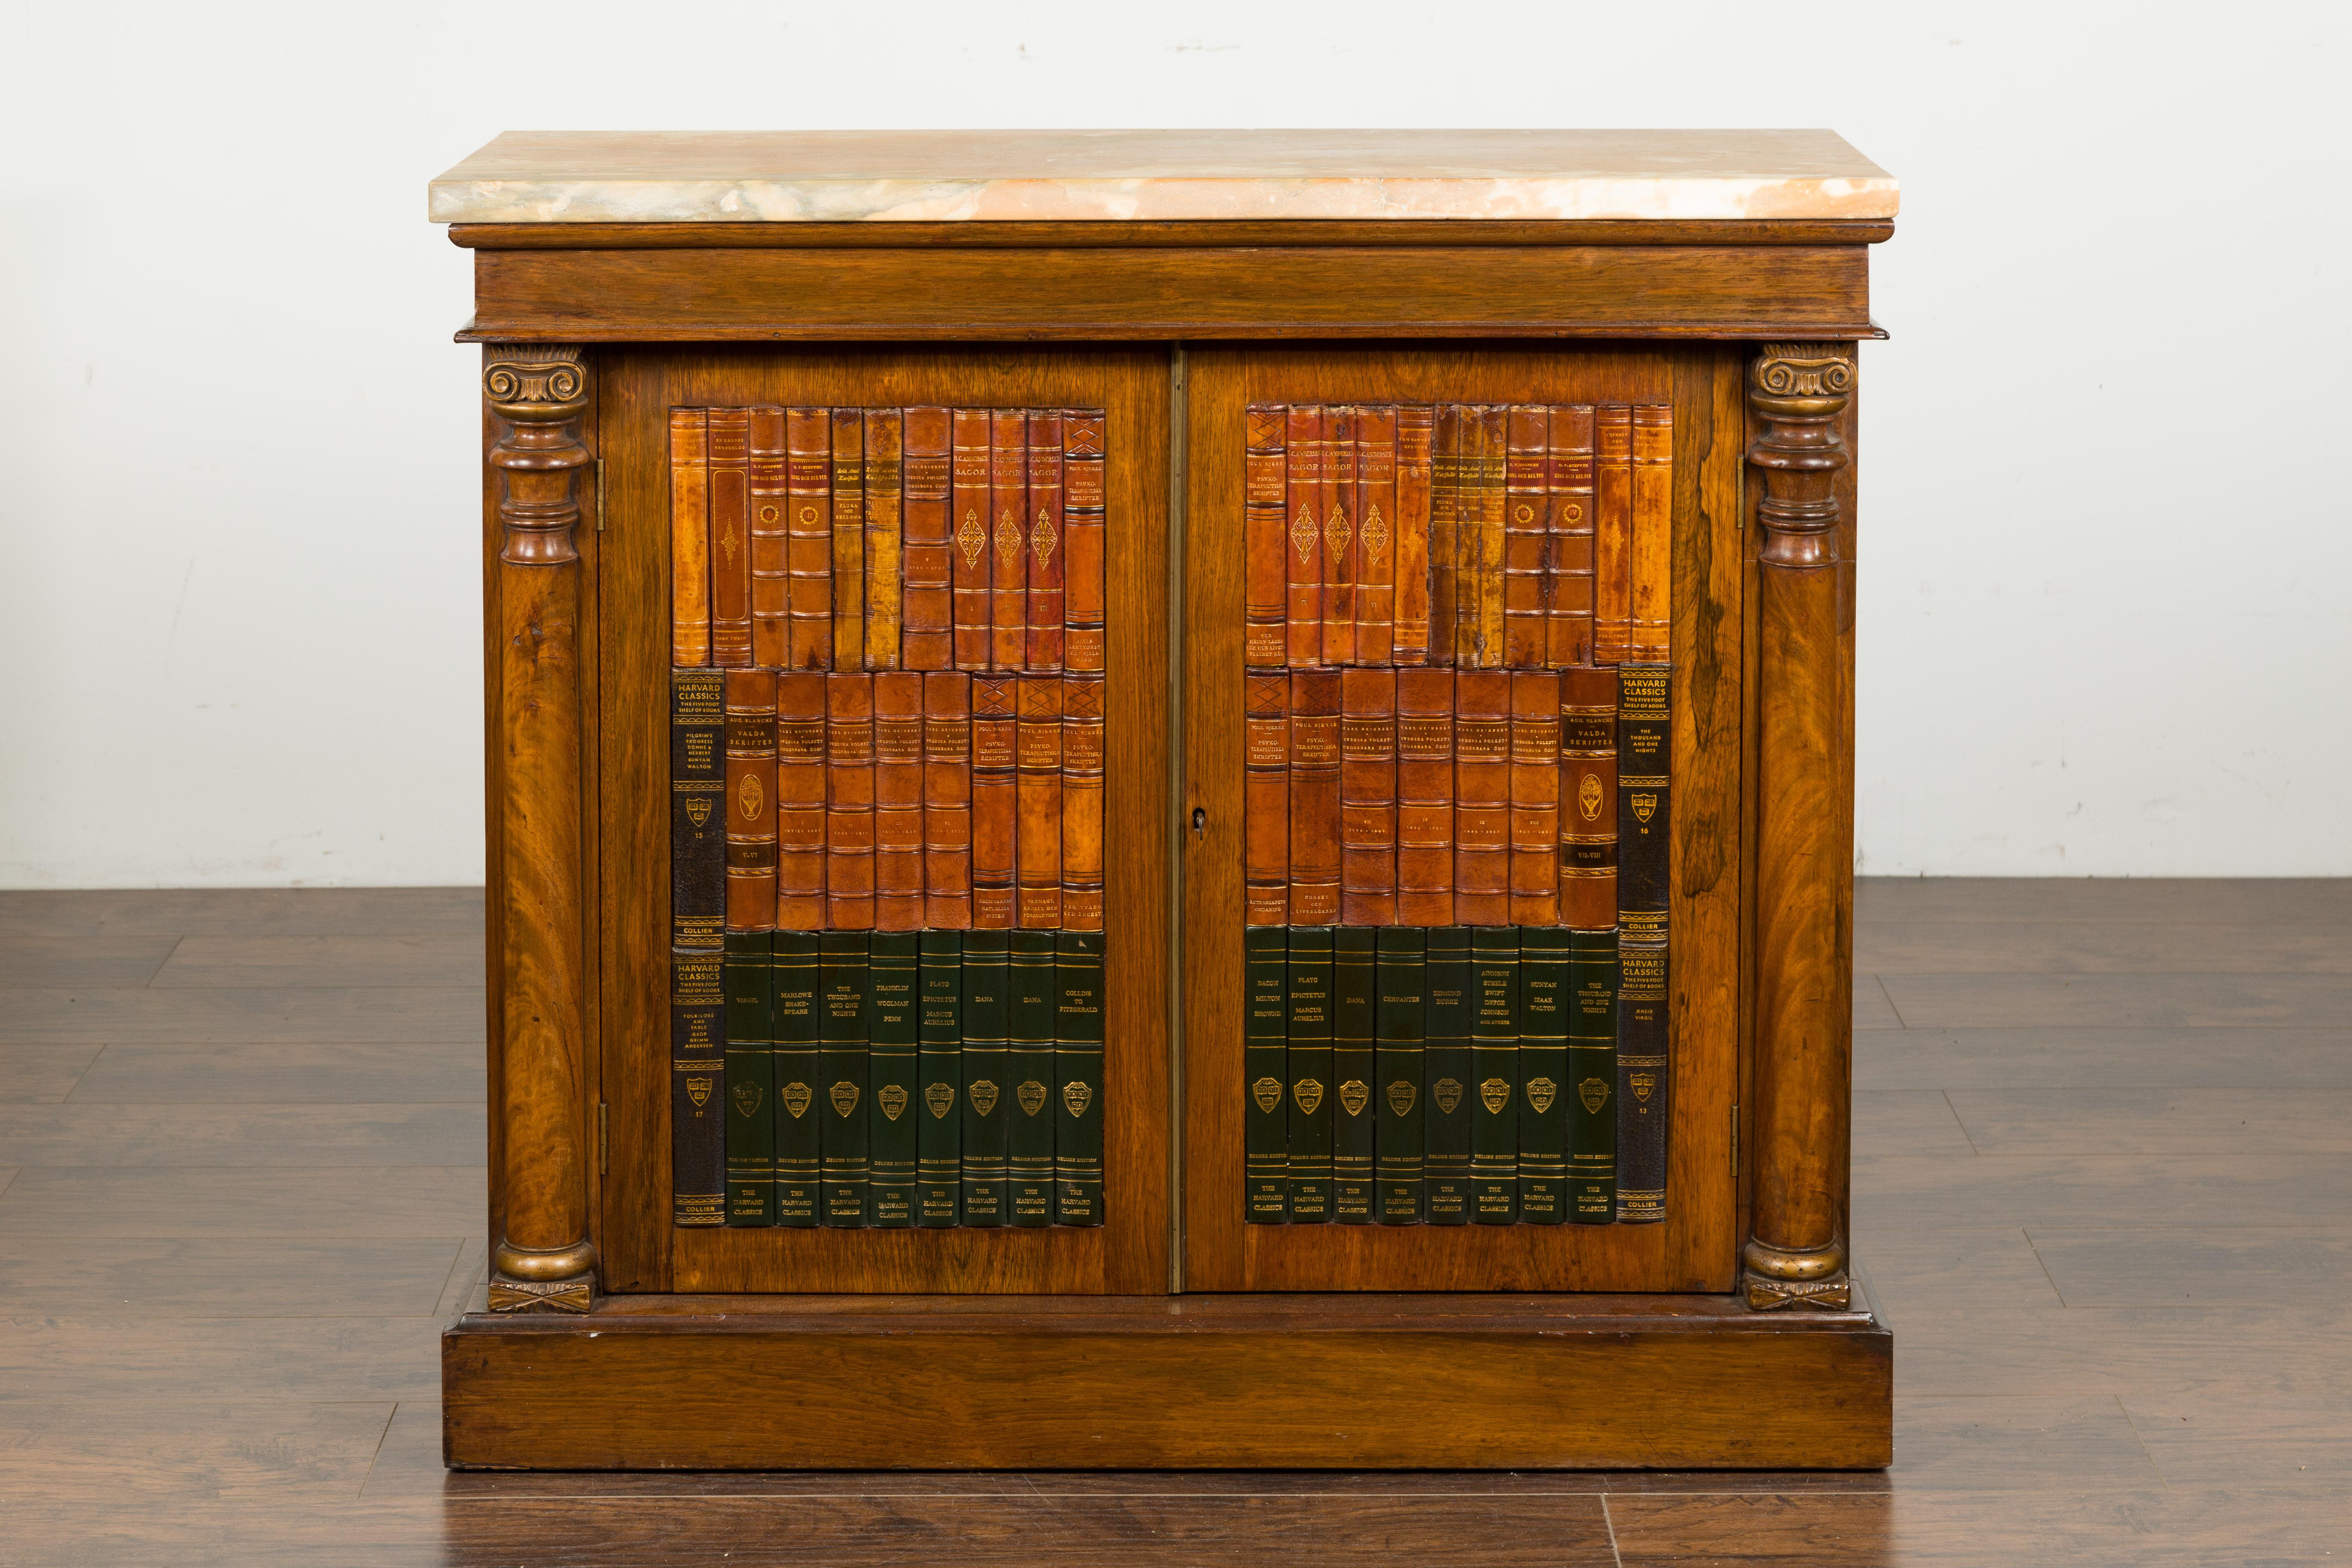 A French Napoléon III period faux book rosewood credenza from the late 19th century, with marble top and ionic columns. Created in France at the end of Emperor Napoléon III's reign, this rosewood credenza features a rectangular marble top sitting